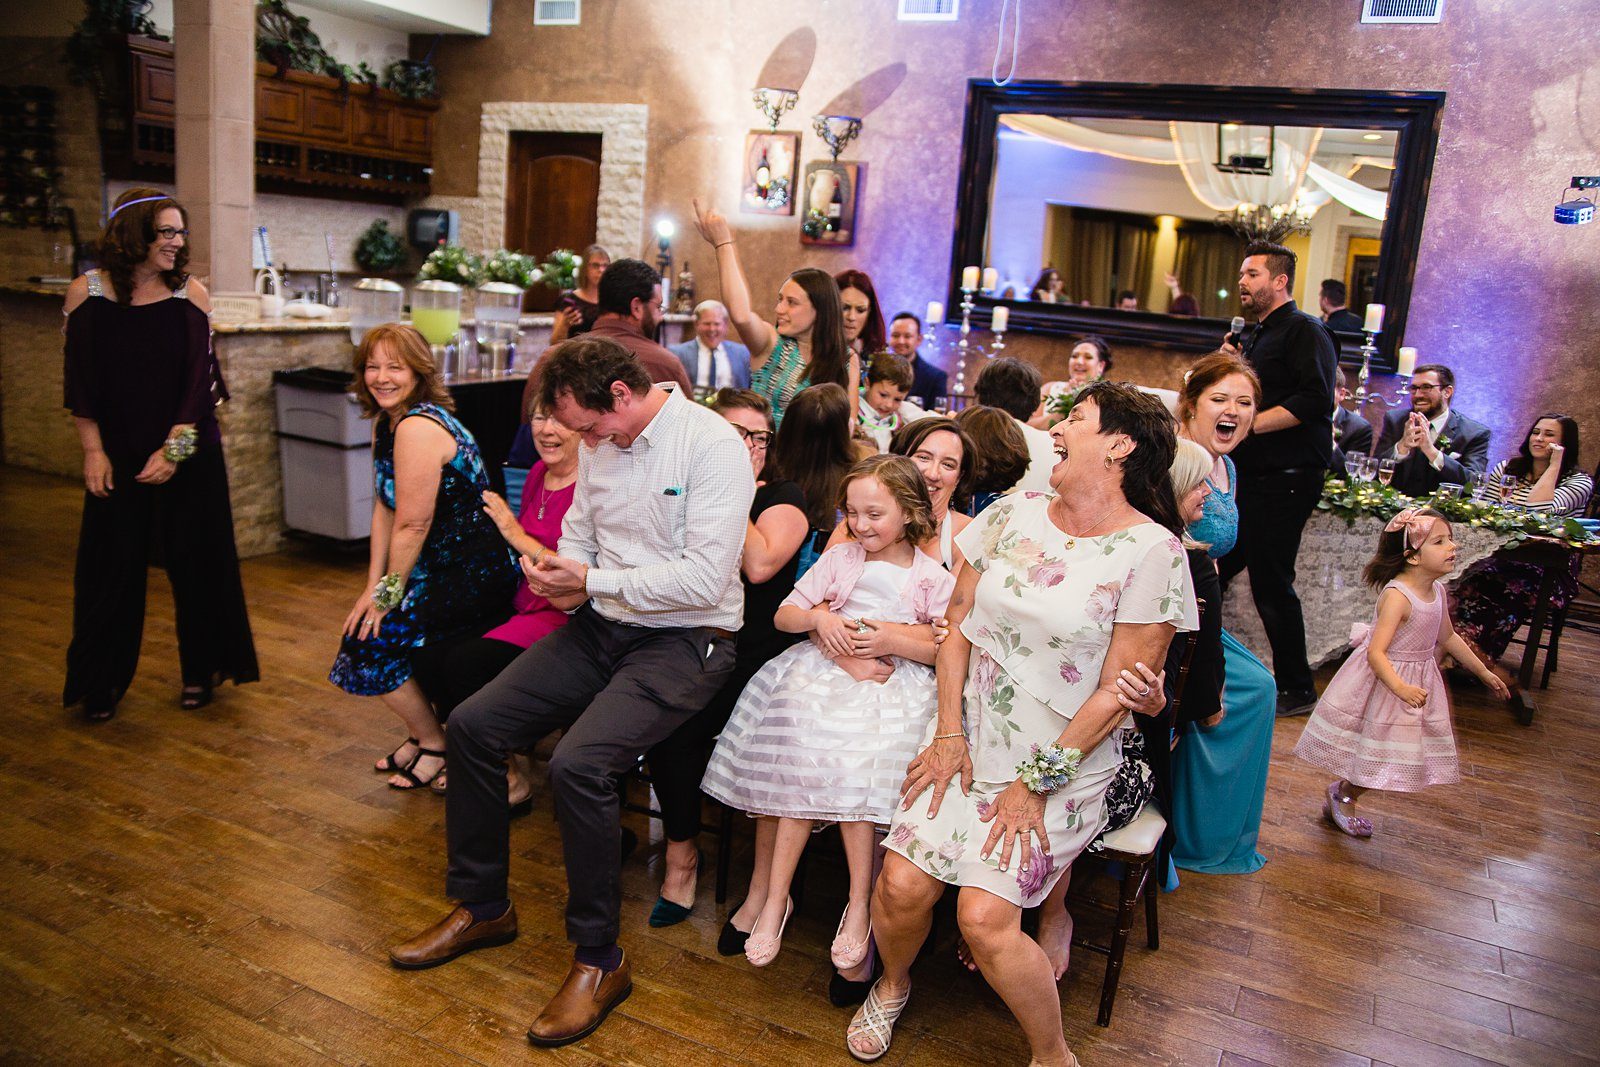 Guests playing a scavenger hunt game during the wedding reception by PMA Photography.